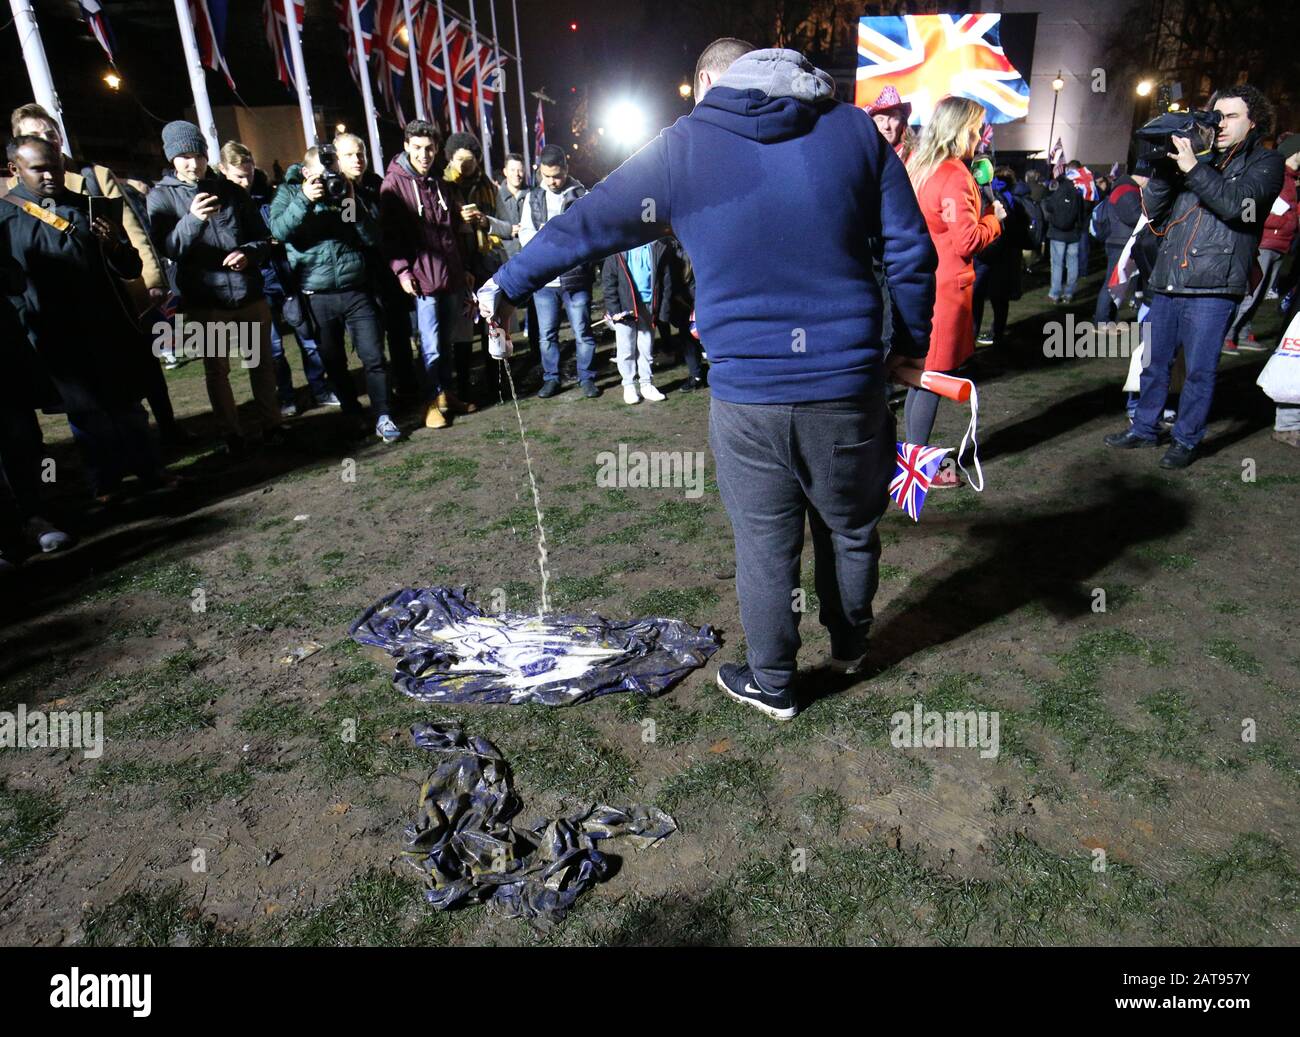 A pro-Brexit supporter pours beer onto an EU flag in Parliament Square, London, ahead of the UK leaving the European Union at 11pm on Friday. Stock Photo